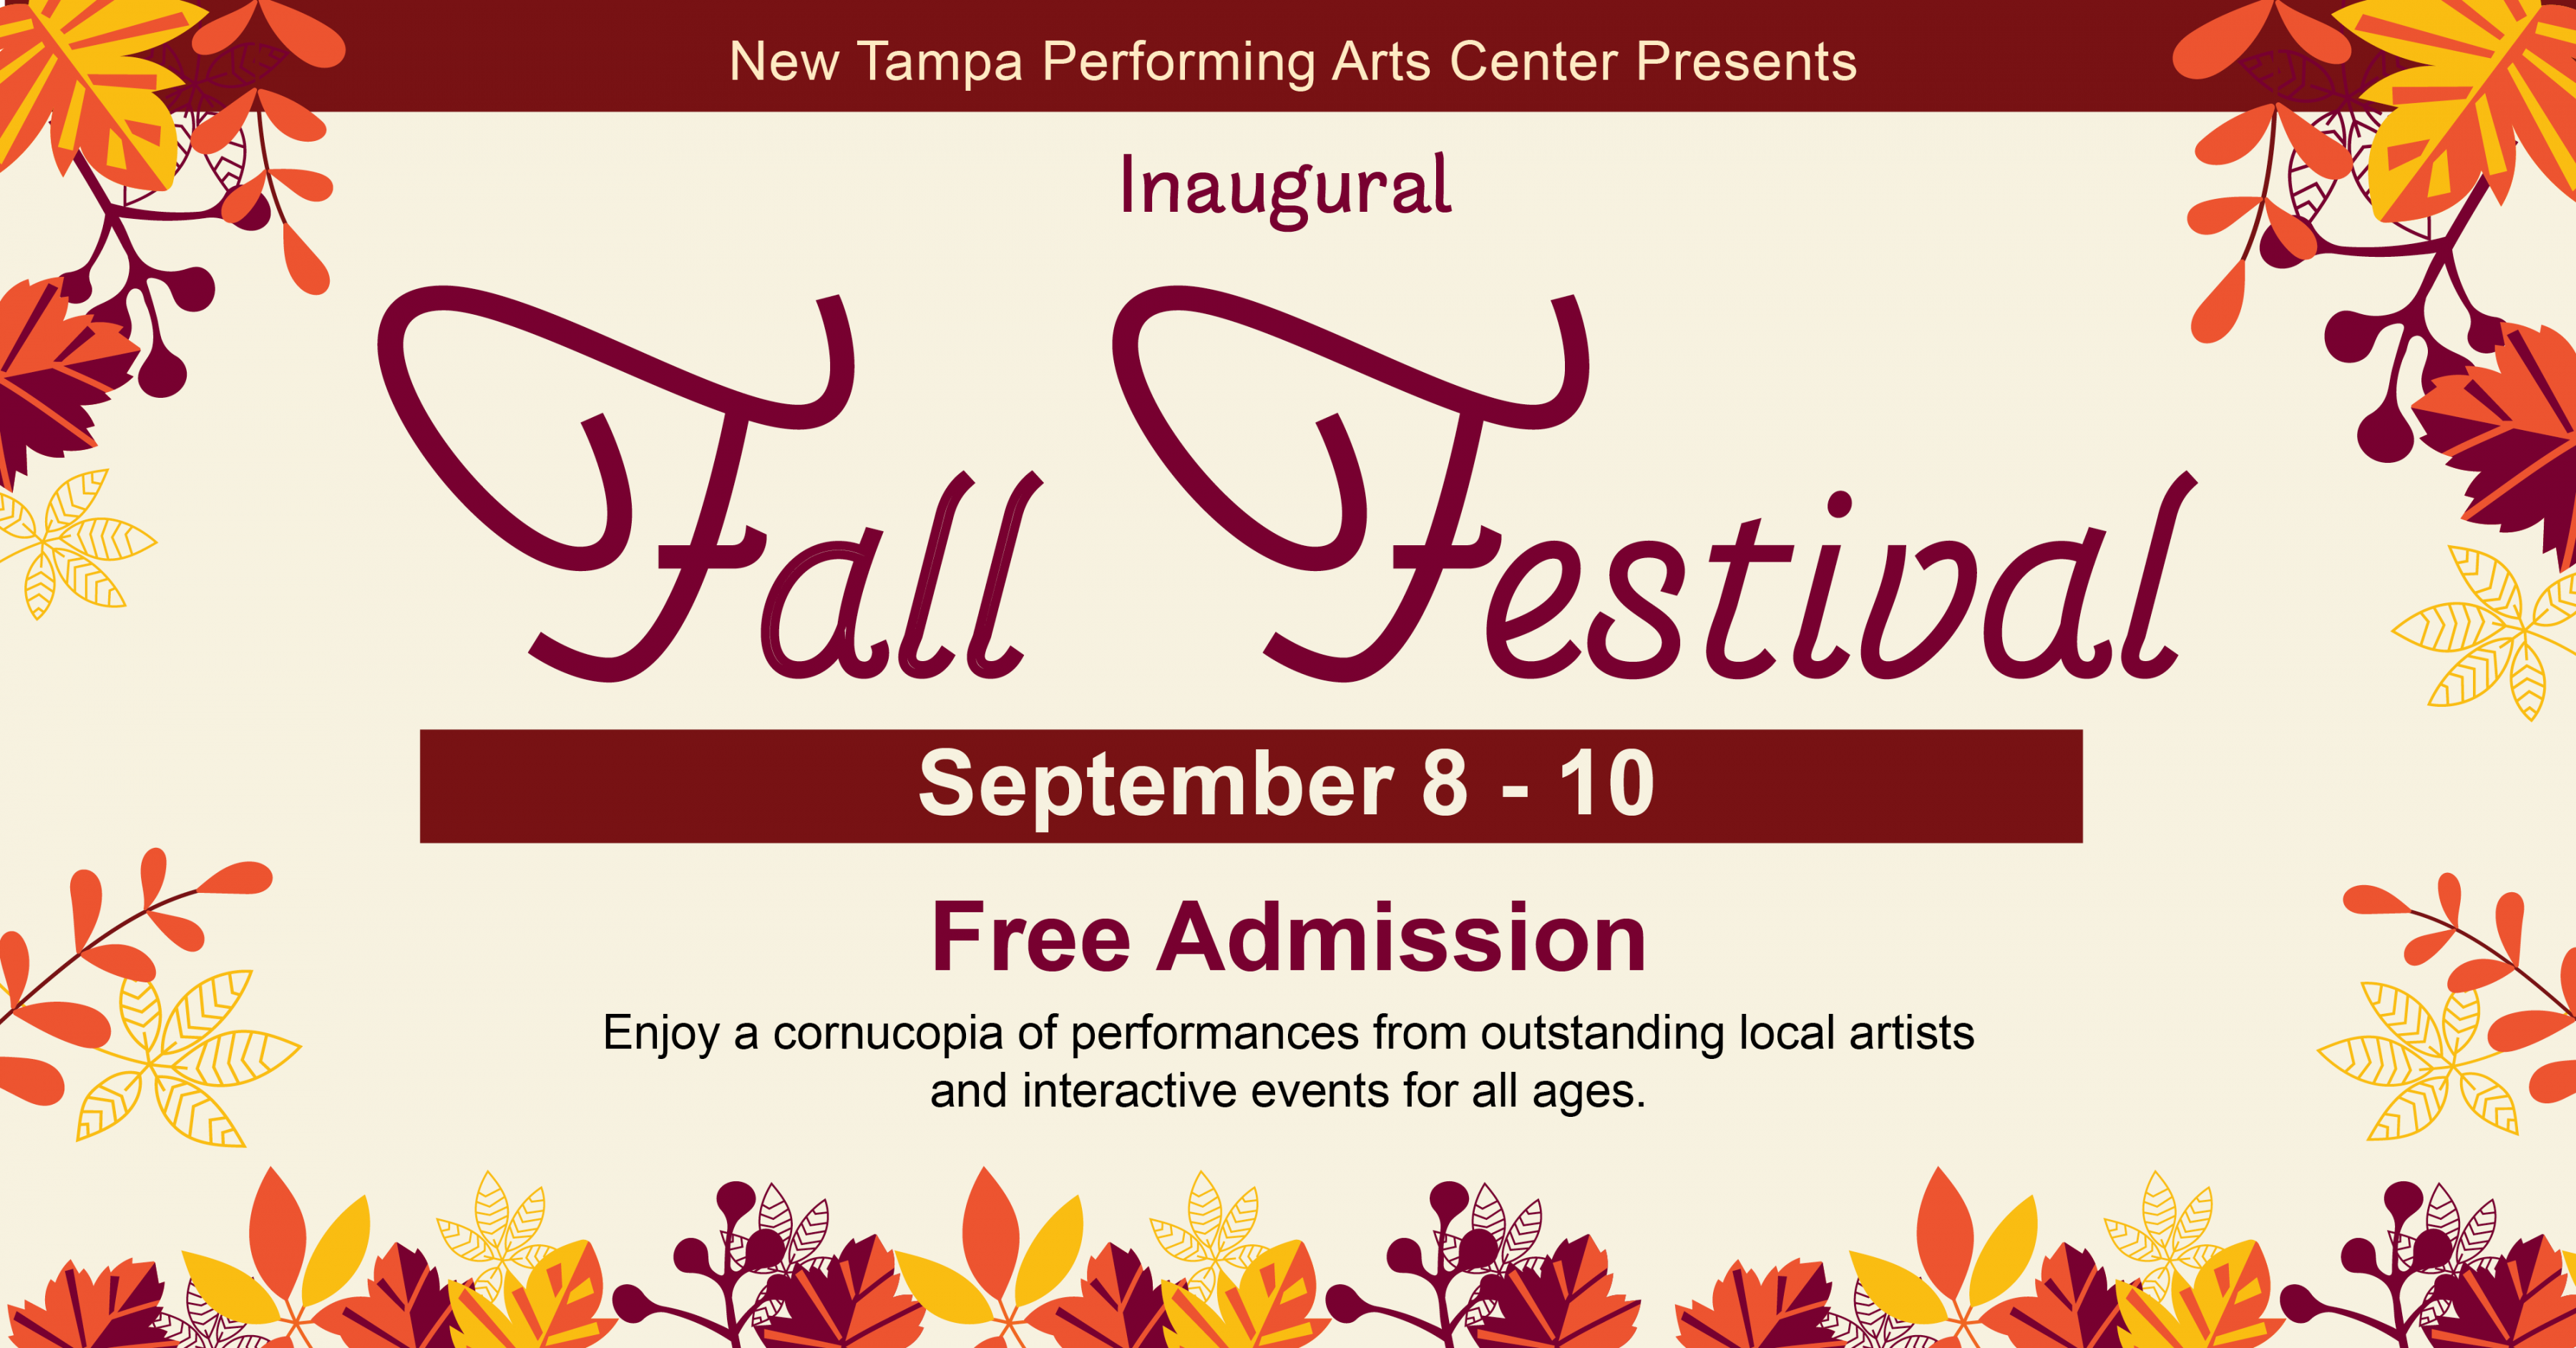 Hillsborough County -  New Tampa Performing Arts Centers